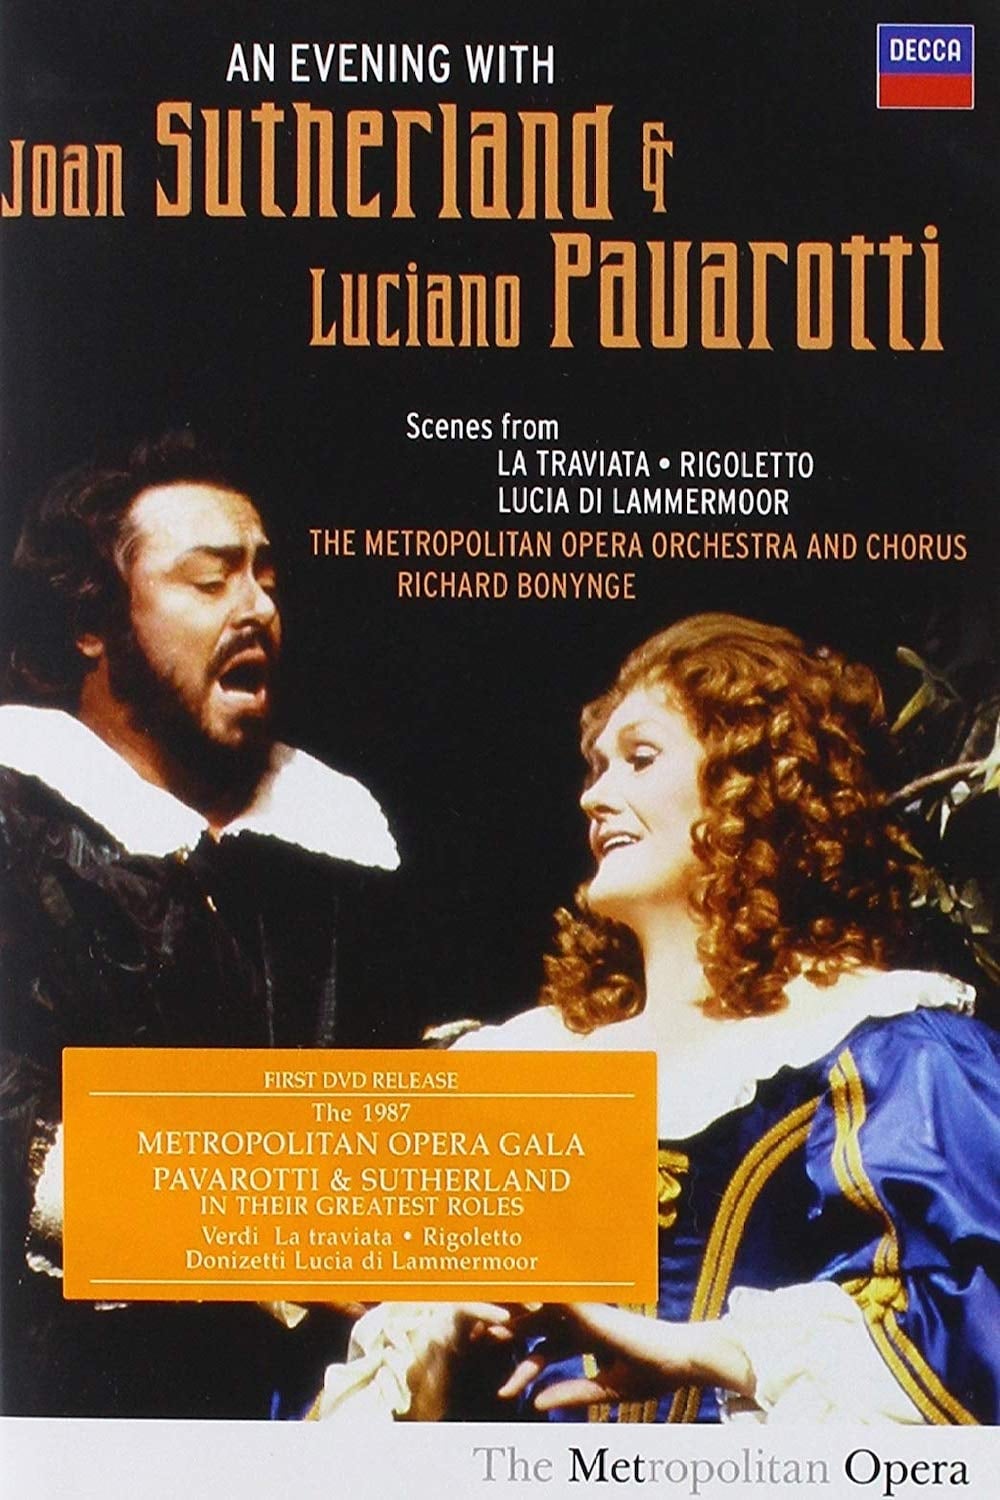 An Evening with Joan Sutherland and Luciano Pavarotti (1988)